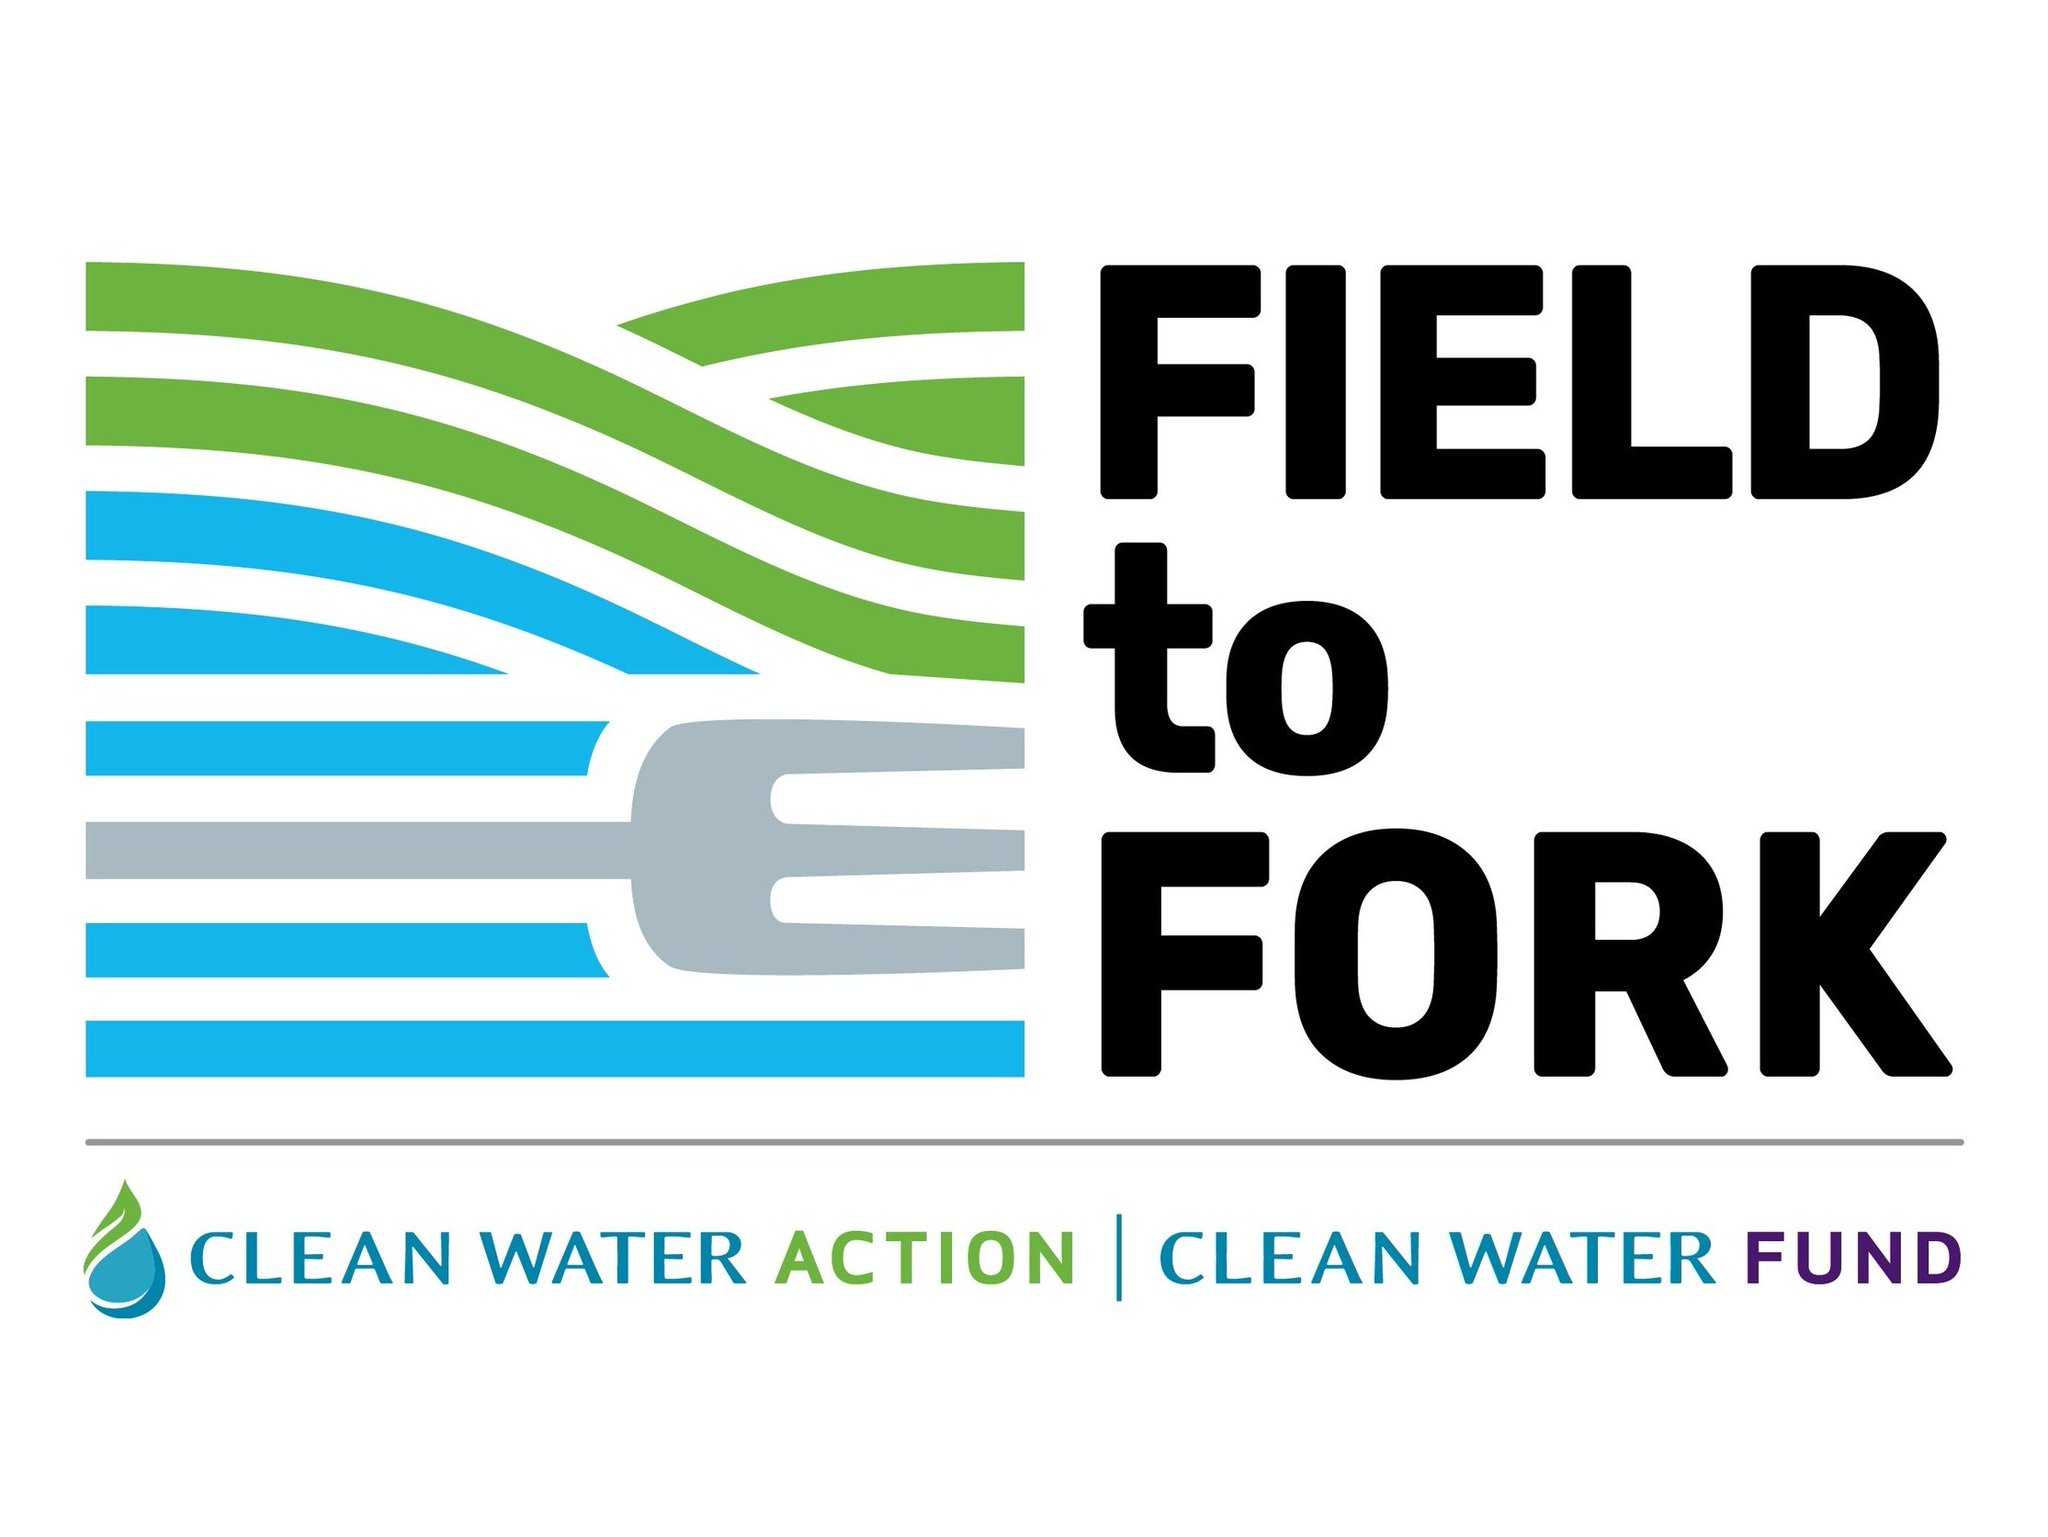 Field to Fork campaign logo from Clean Water Action and Clean Water Fund